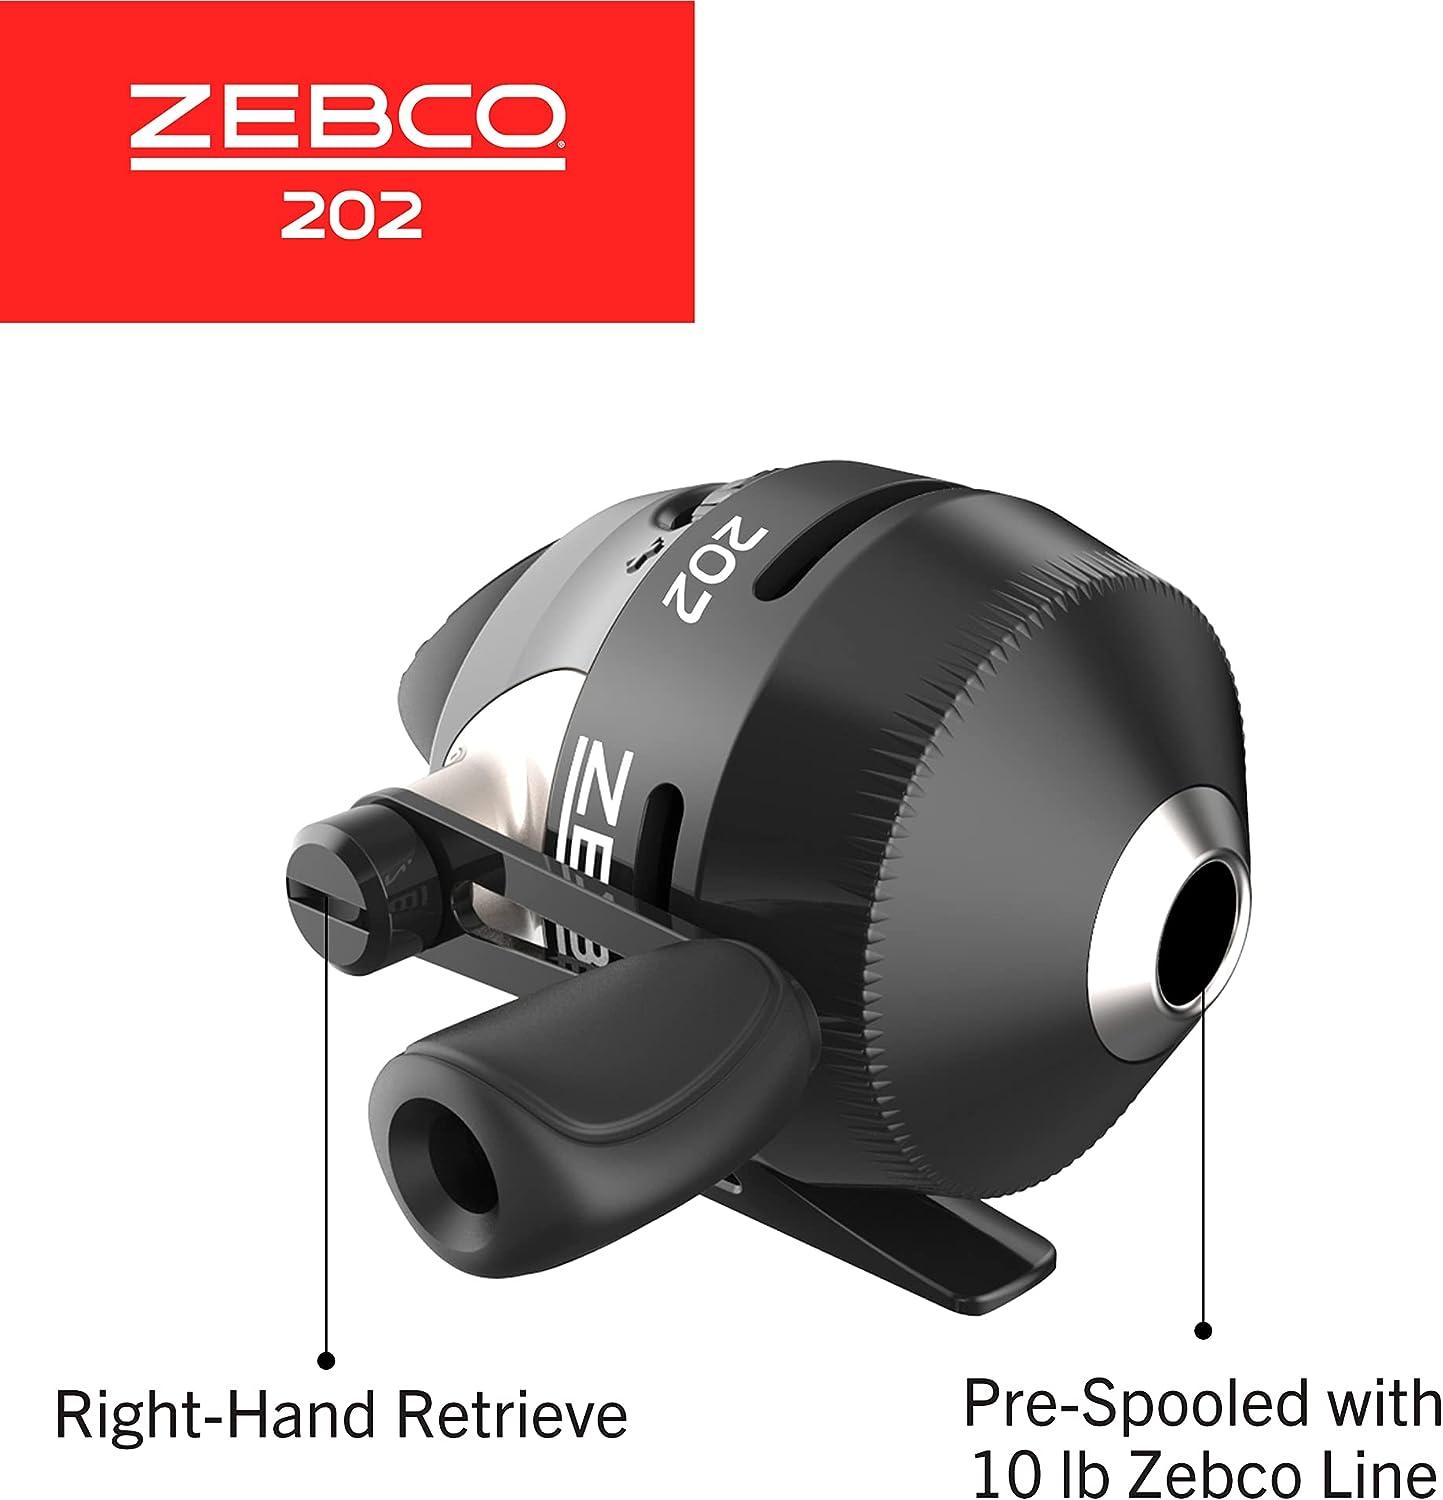 Zebco 202 Spincast Fishing Reel, Size 30 Reel, Right-Hand Retrieve, Durable  All-Metal Gears, Stainless Steel Pick-up Pin, Pre-Spooled with 10-Pound  Zebco Fishing Line, Black, Clam Packaging